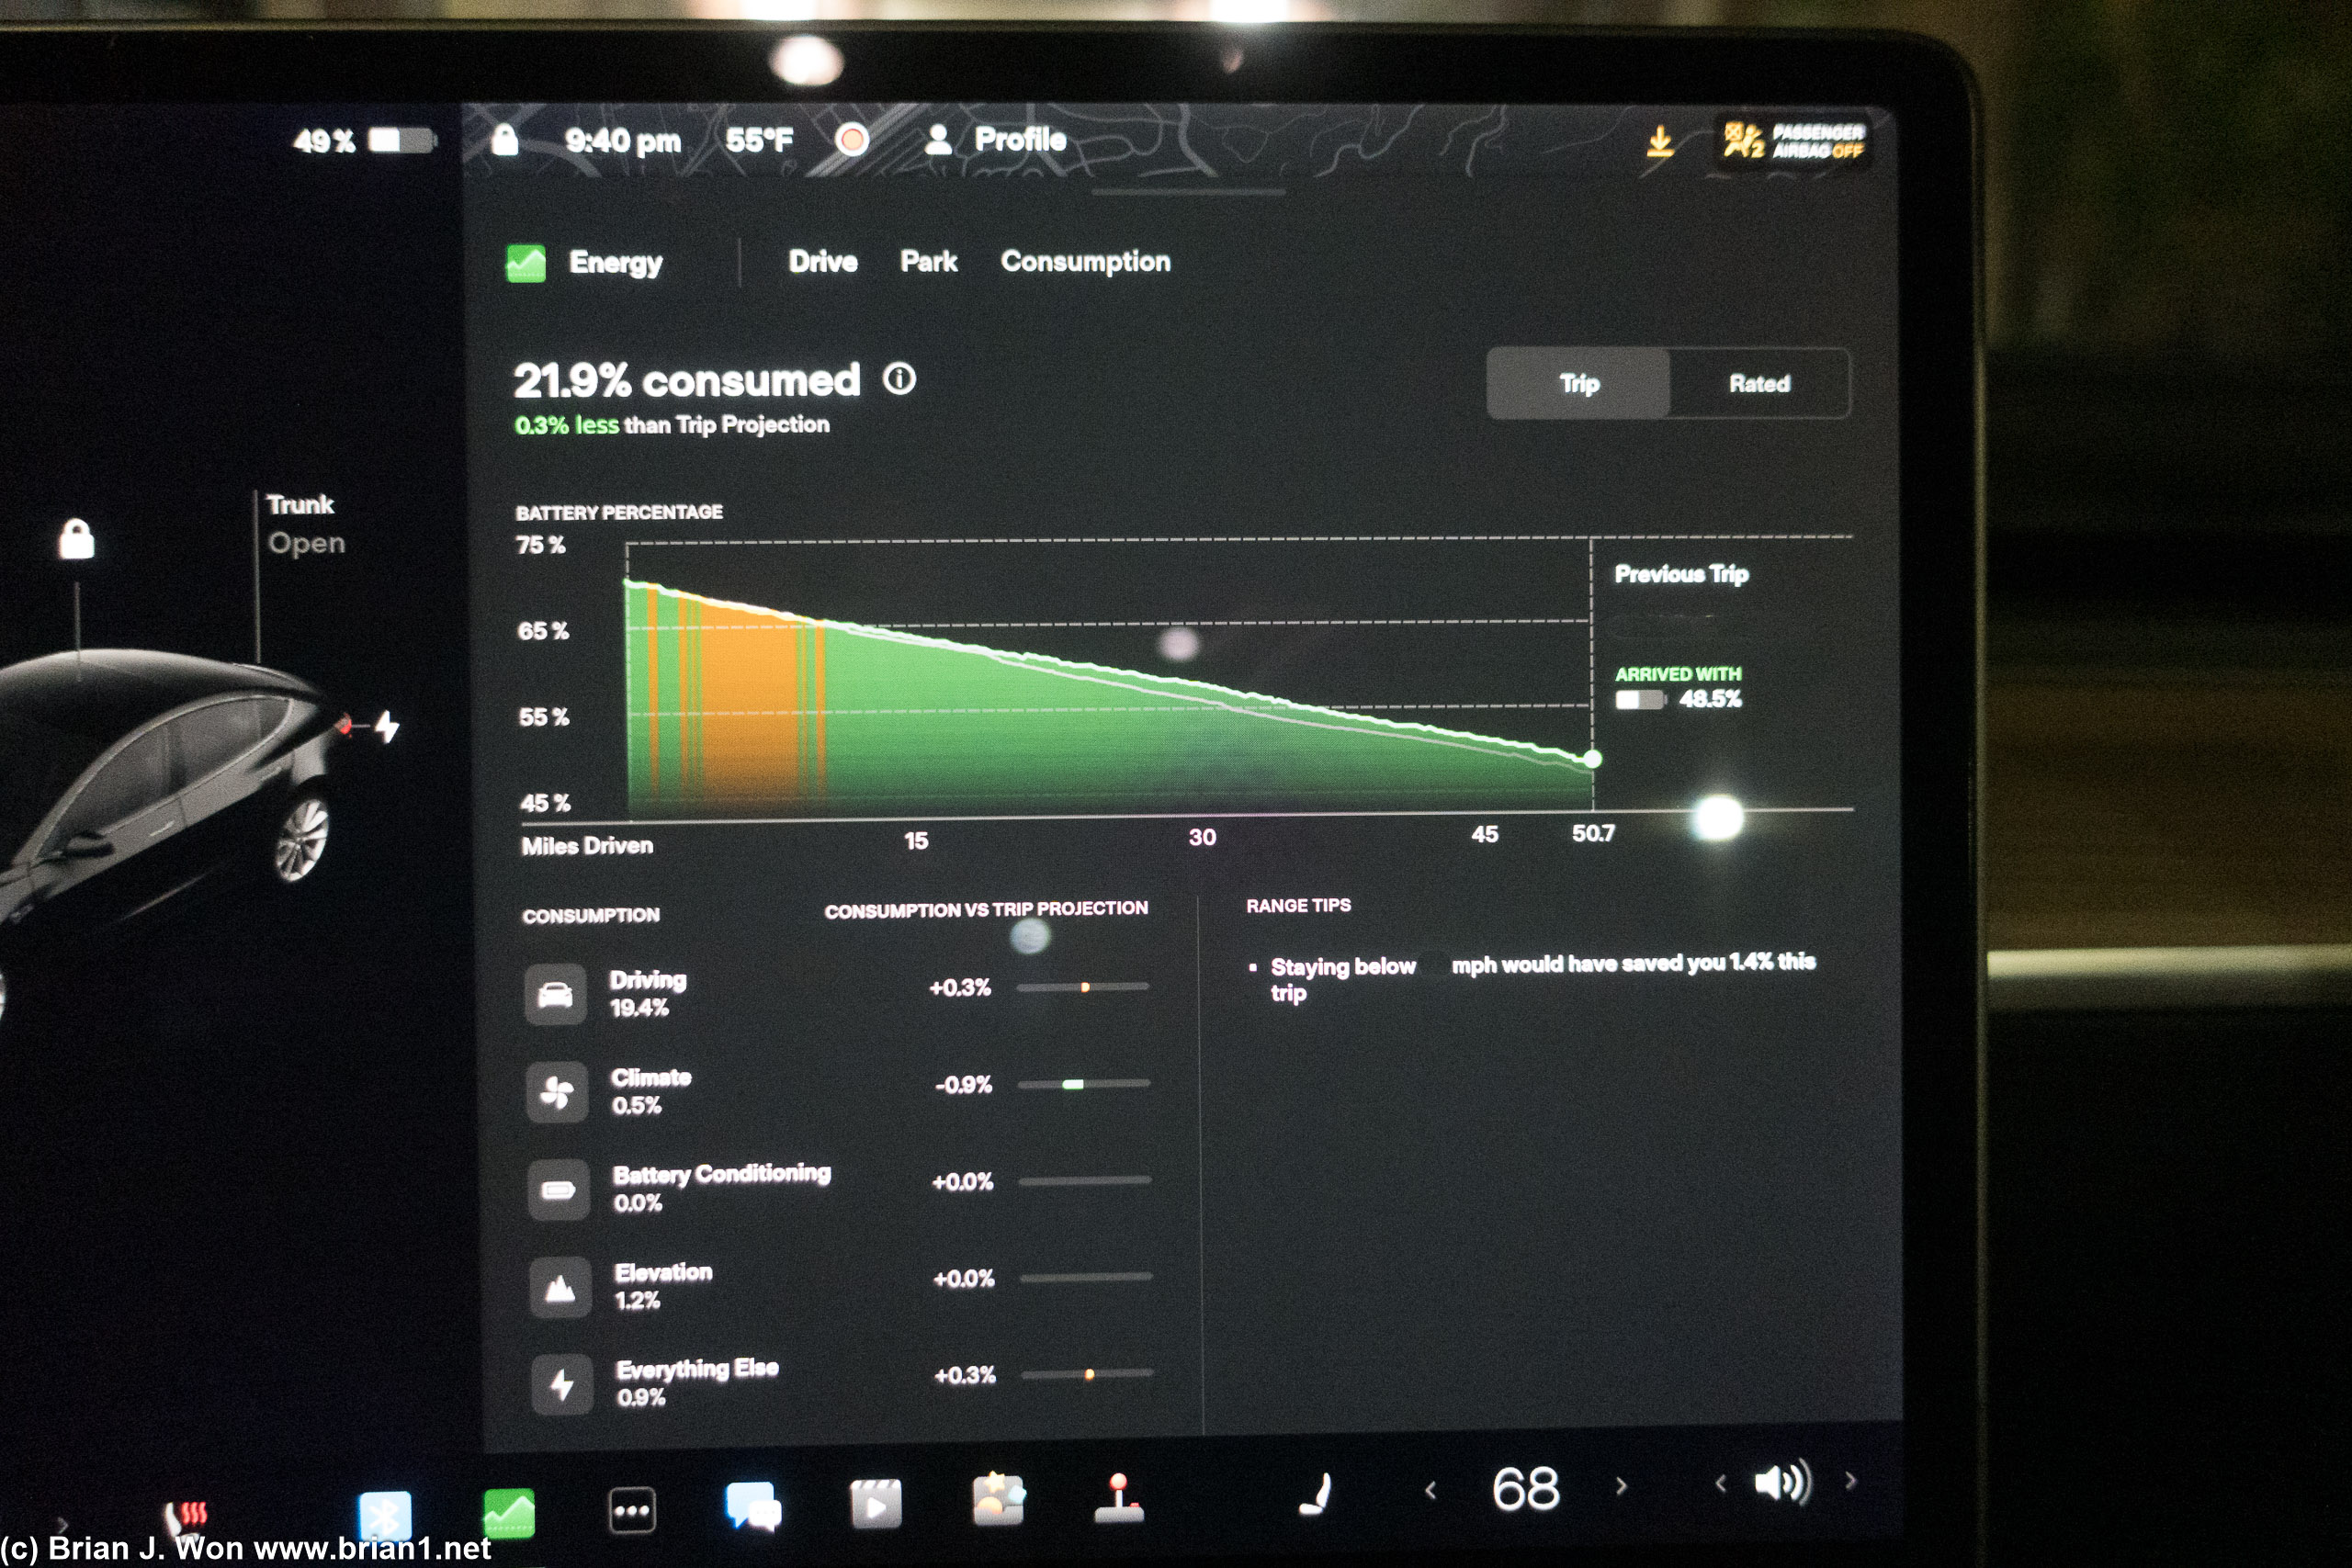 Woah, newish "Drive" feature in the Energy screen?